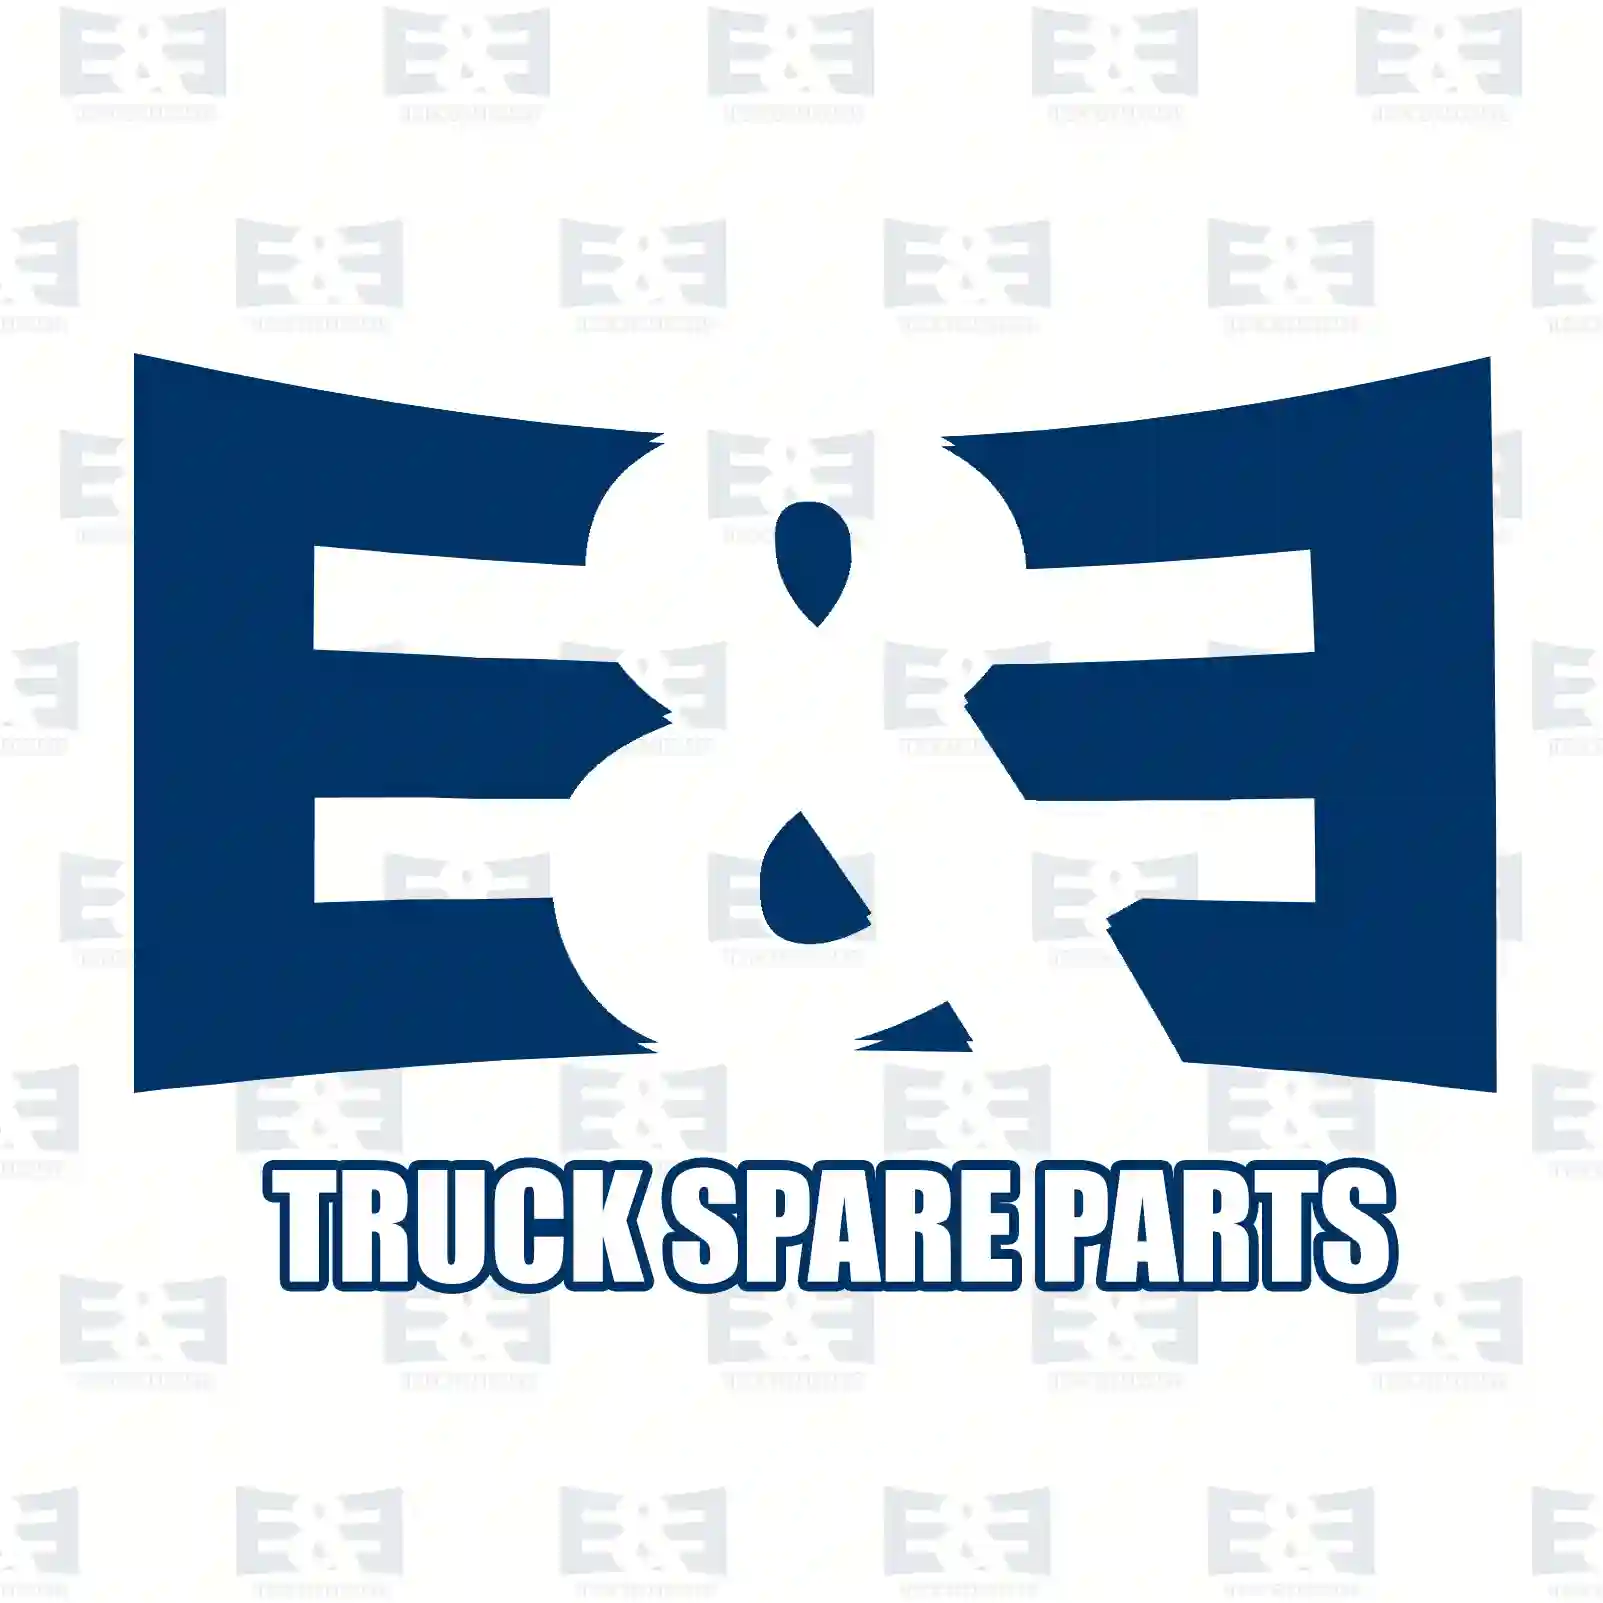  King pin || E&E Truck Spare Parts | Truck Spare Parts, Auotomotive Spare Parts